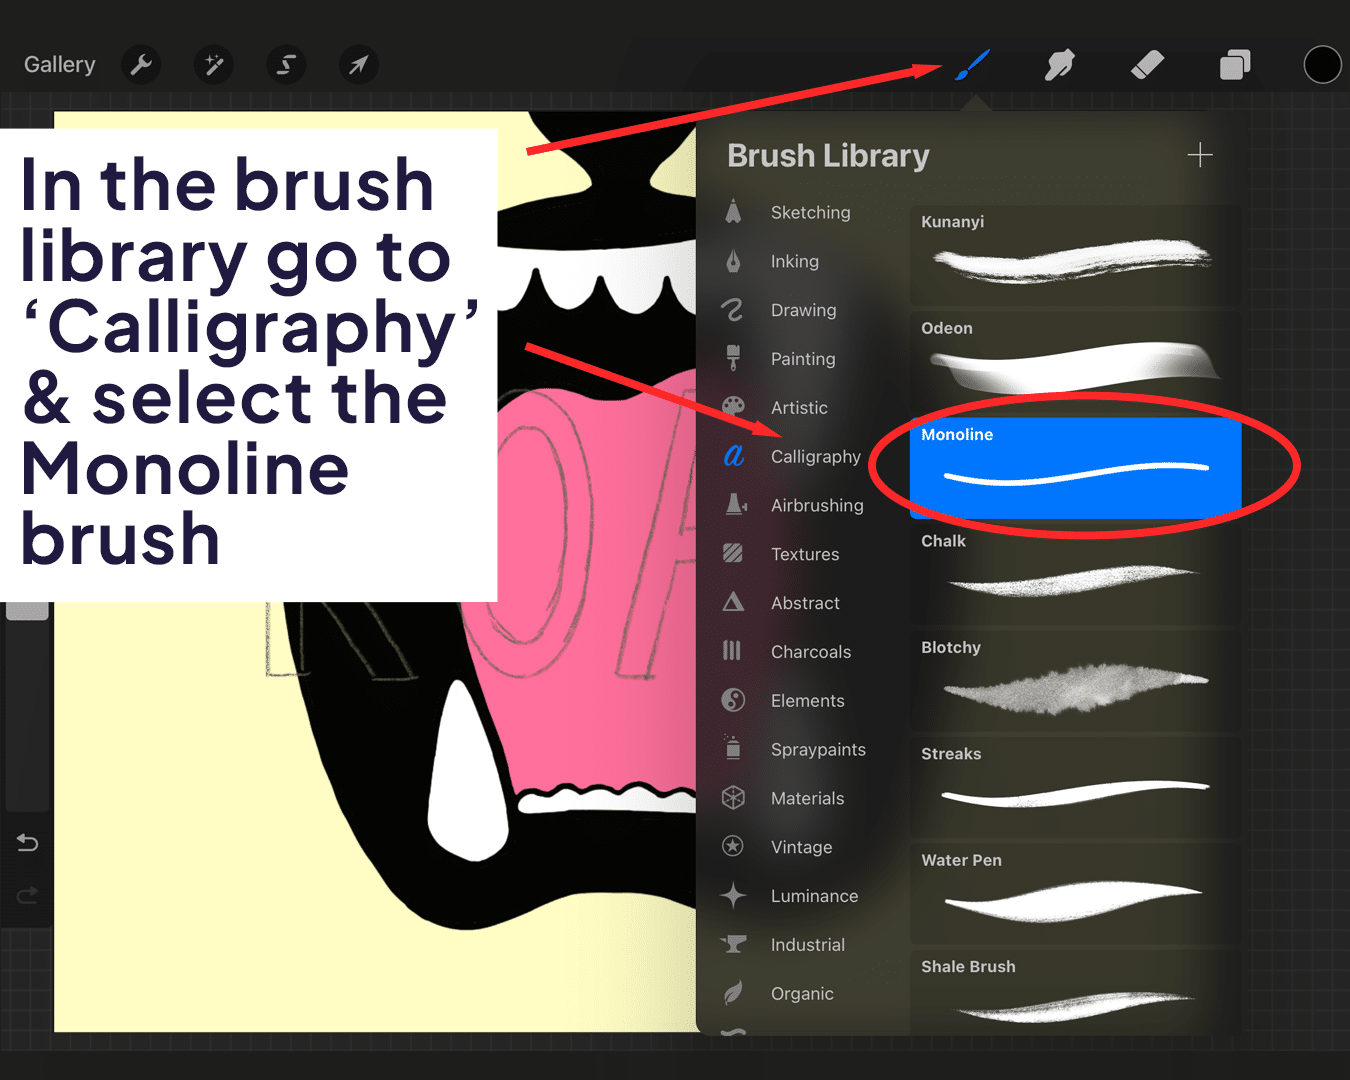 Brush library options